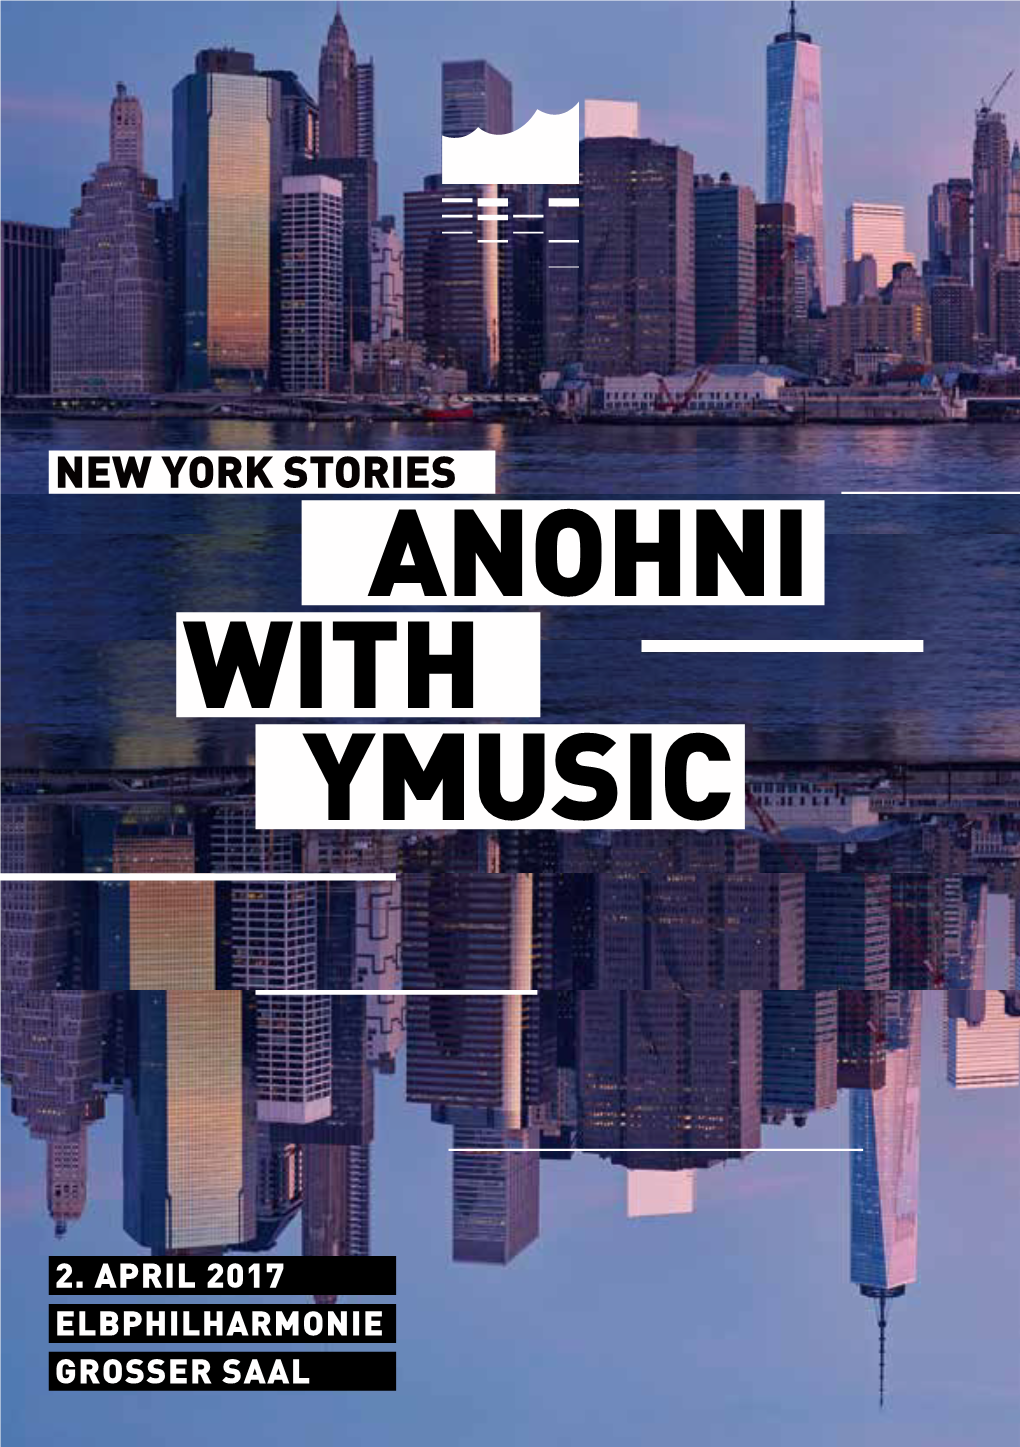 Ymusic Anohni With